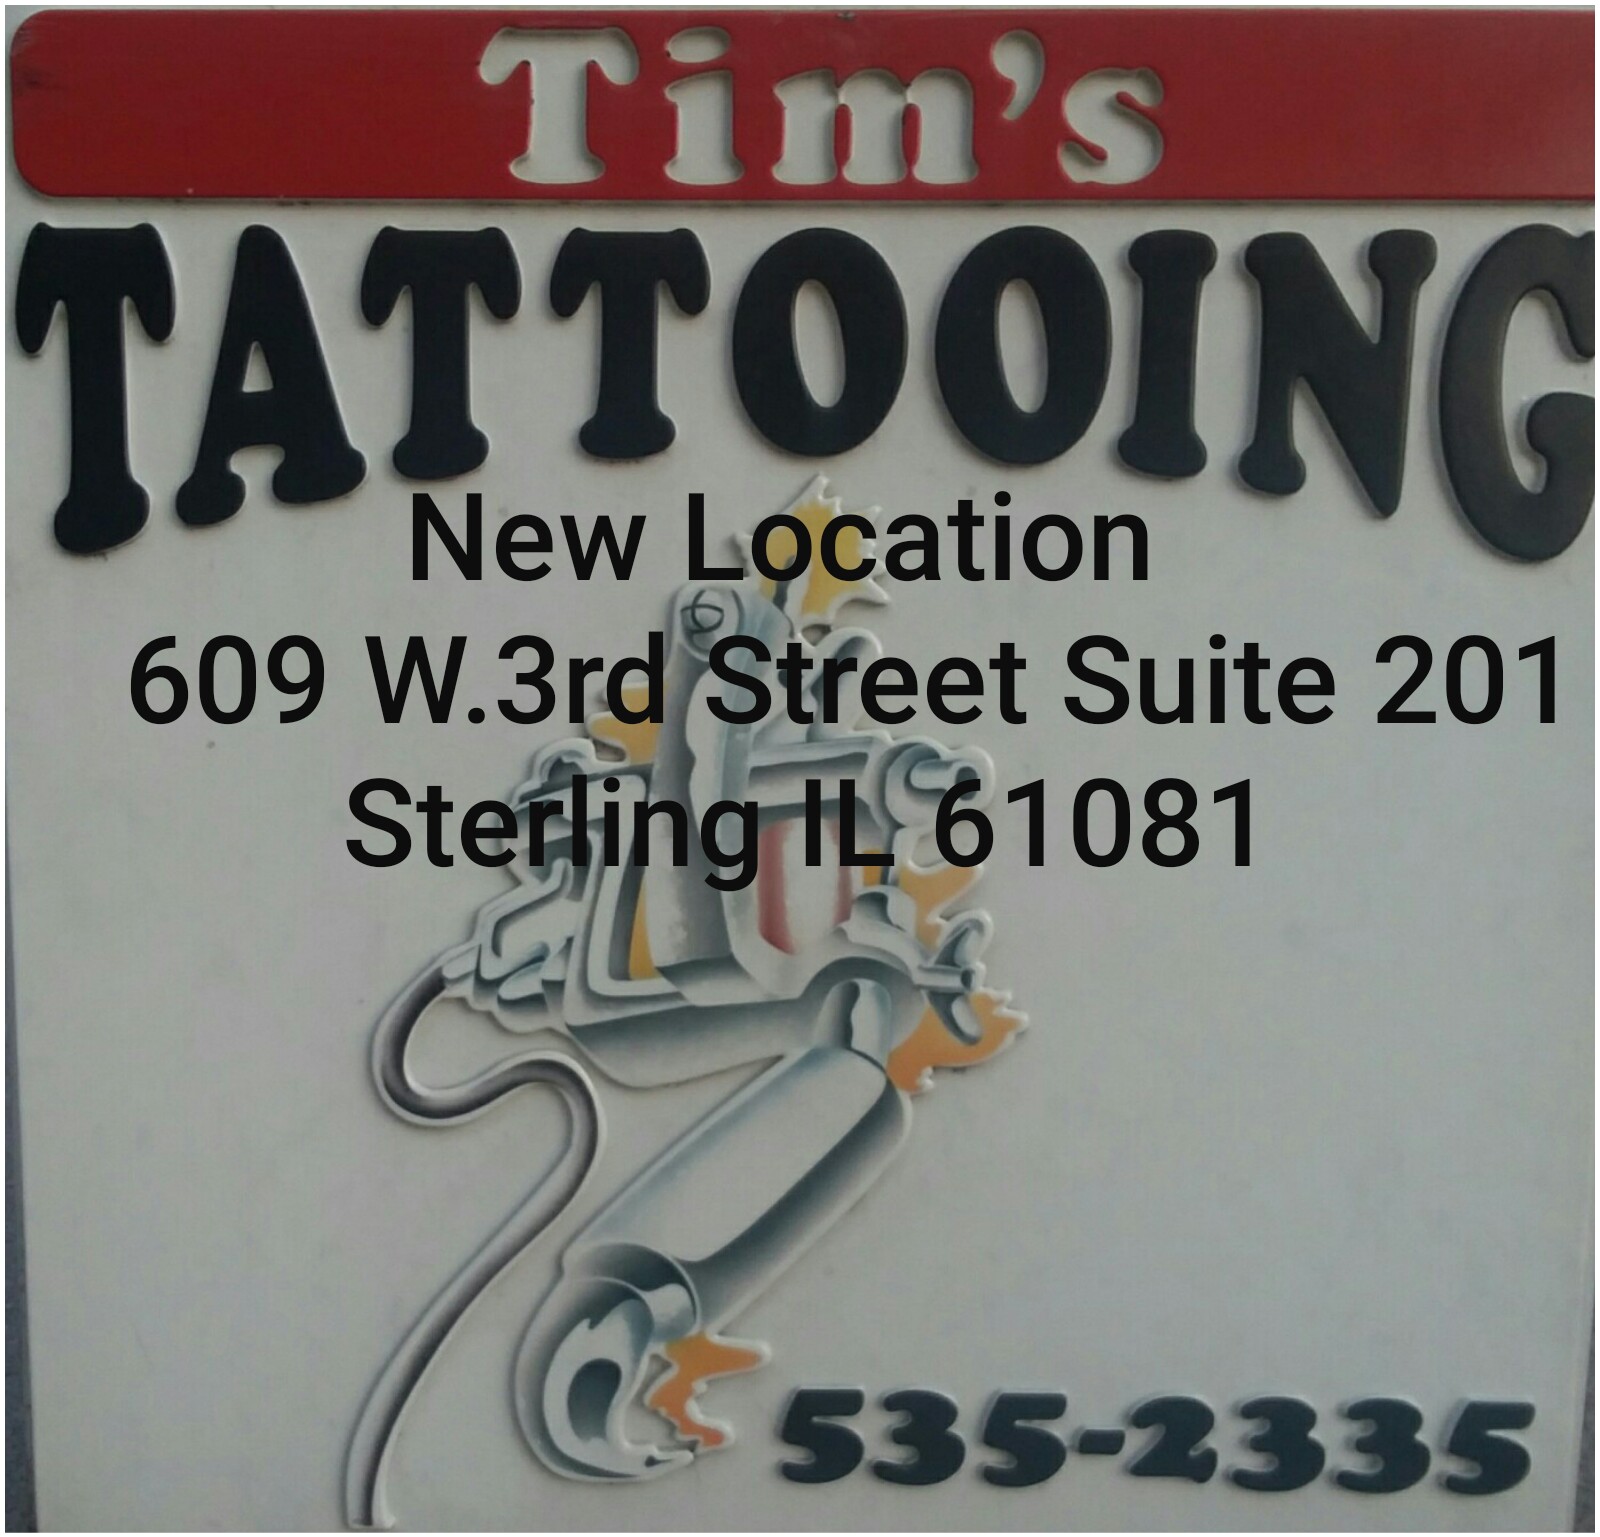 Tims Professional Tattooing 609 W 3rd St Suite 201, Sterling Illinois 61081